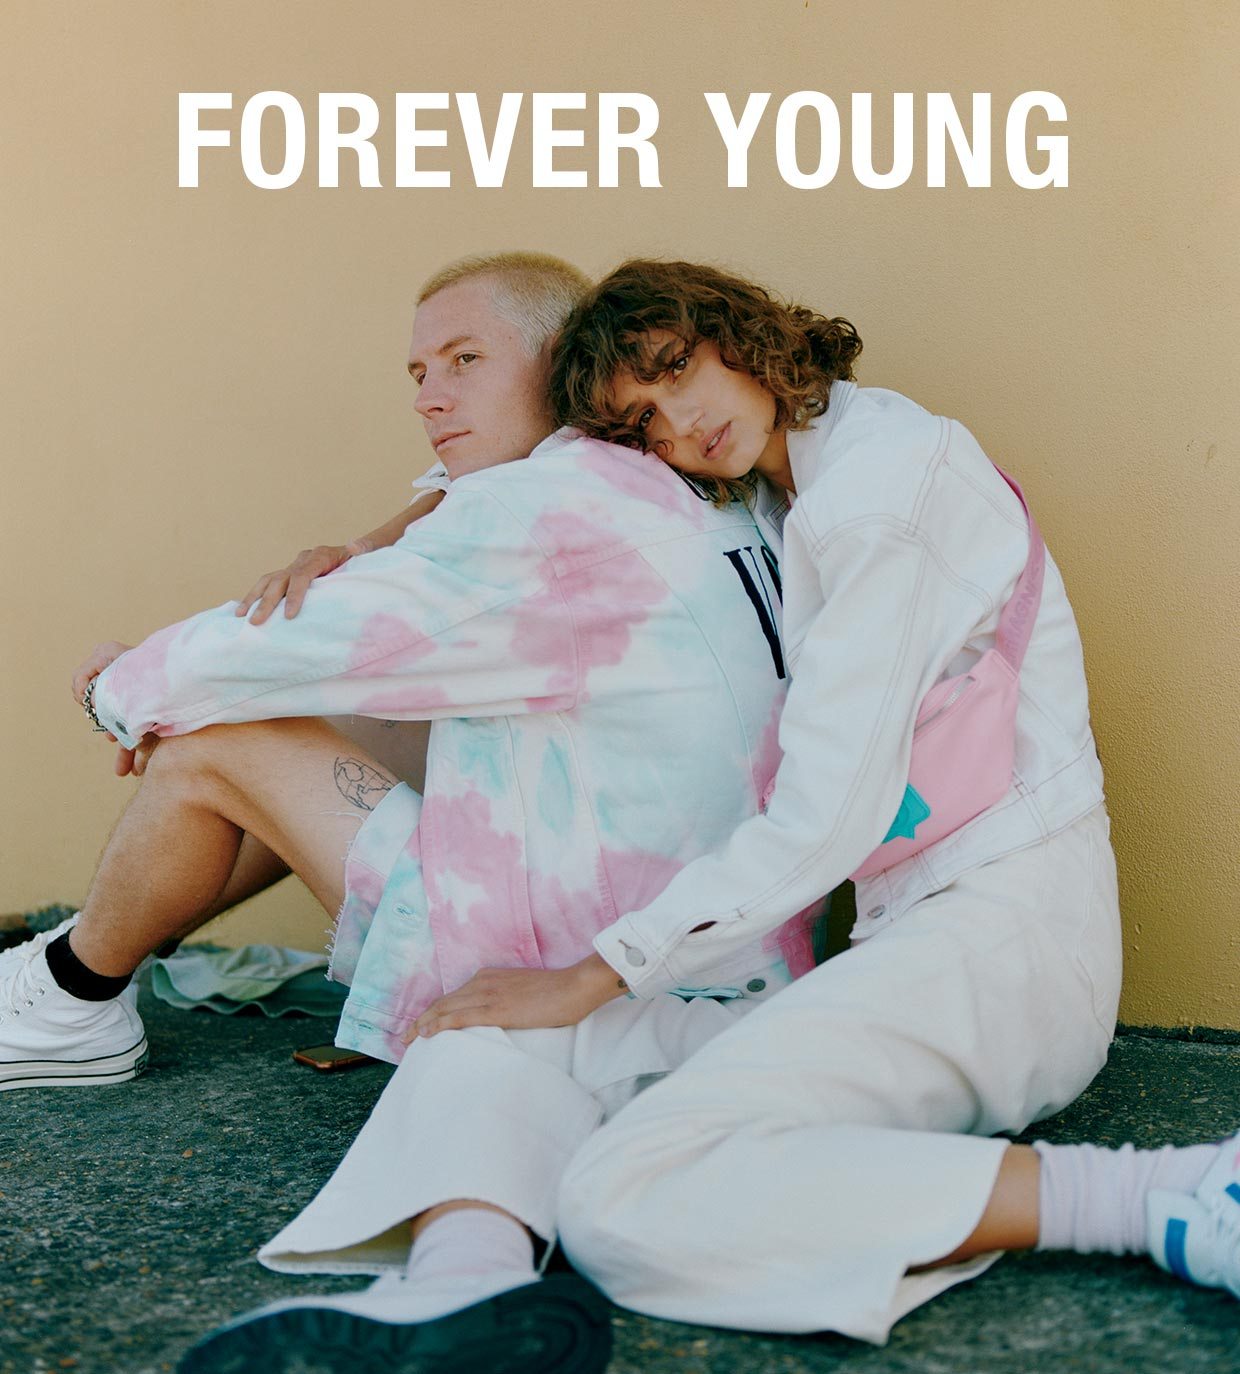 SHOP FOREVER YOUNG